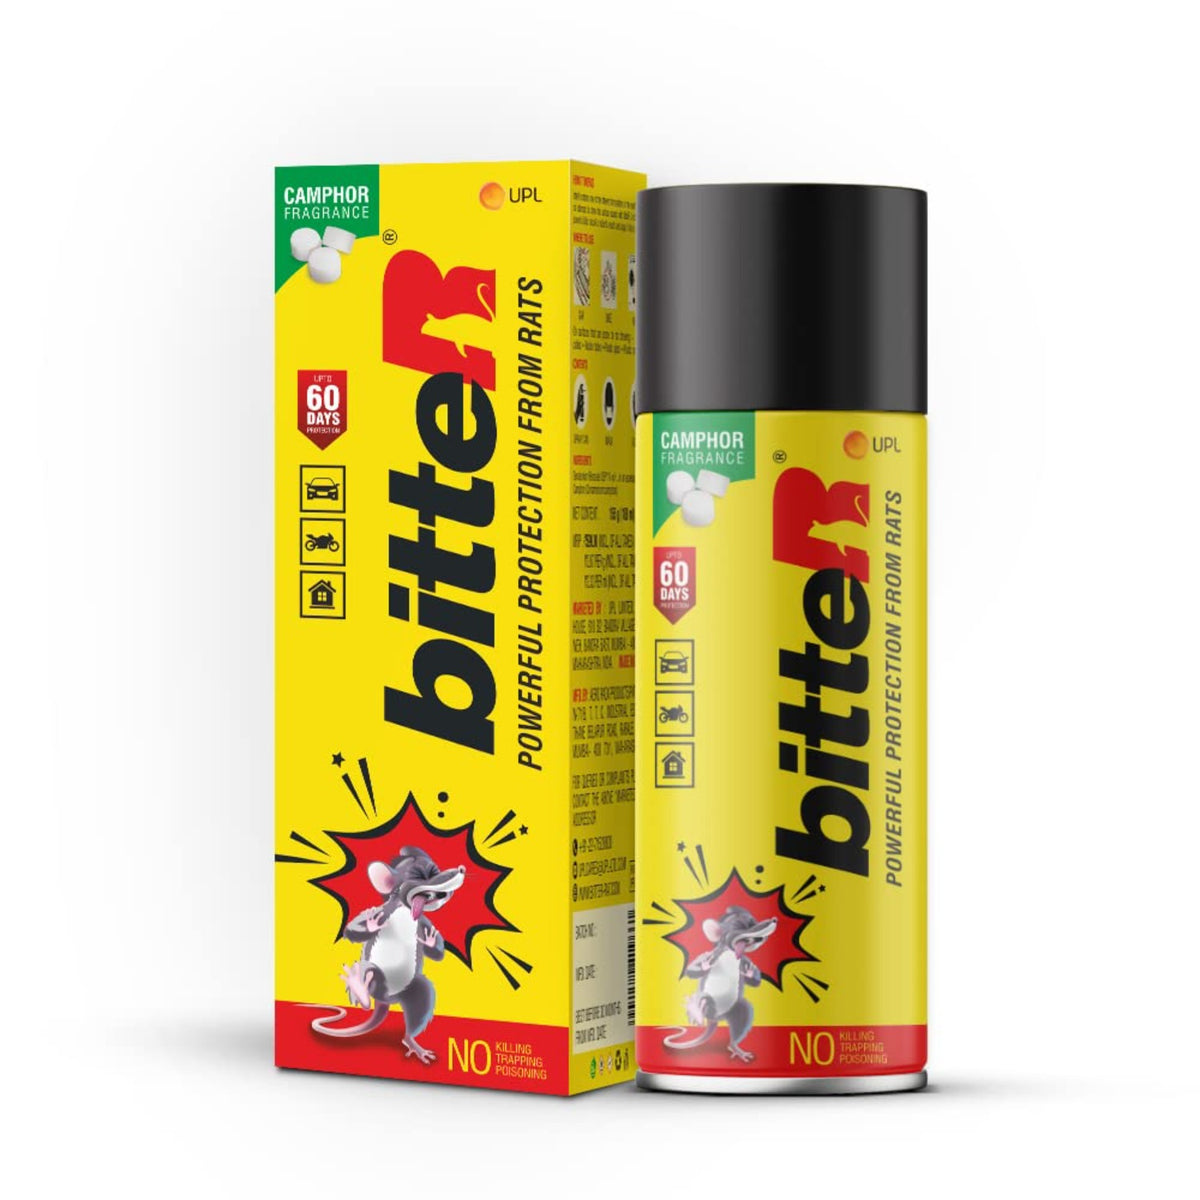 Bitter Powerful Protection From Rats Jumbo Spray Protect Wires in Car,Bike Camphor Fragrance Non Toxic No Kill Only Repels 60 Days Protection Spray 180ml